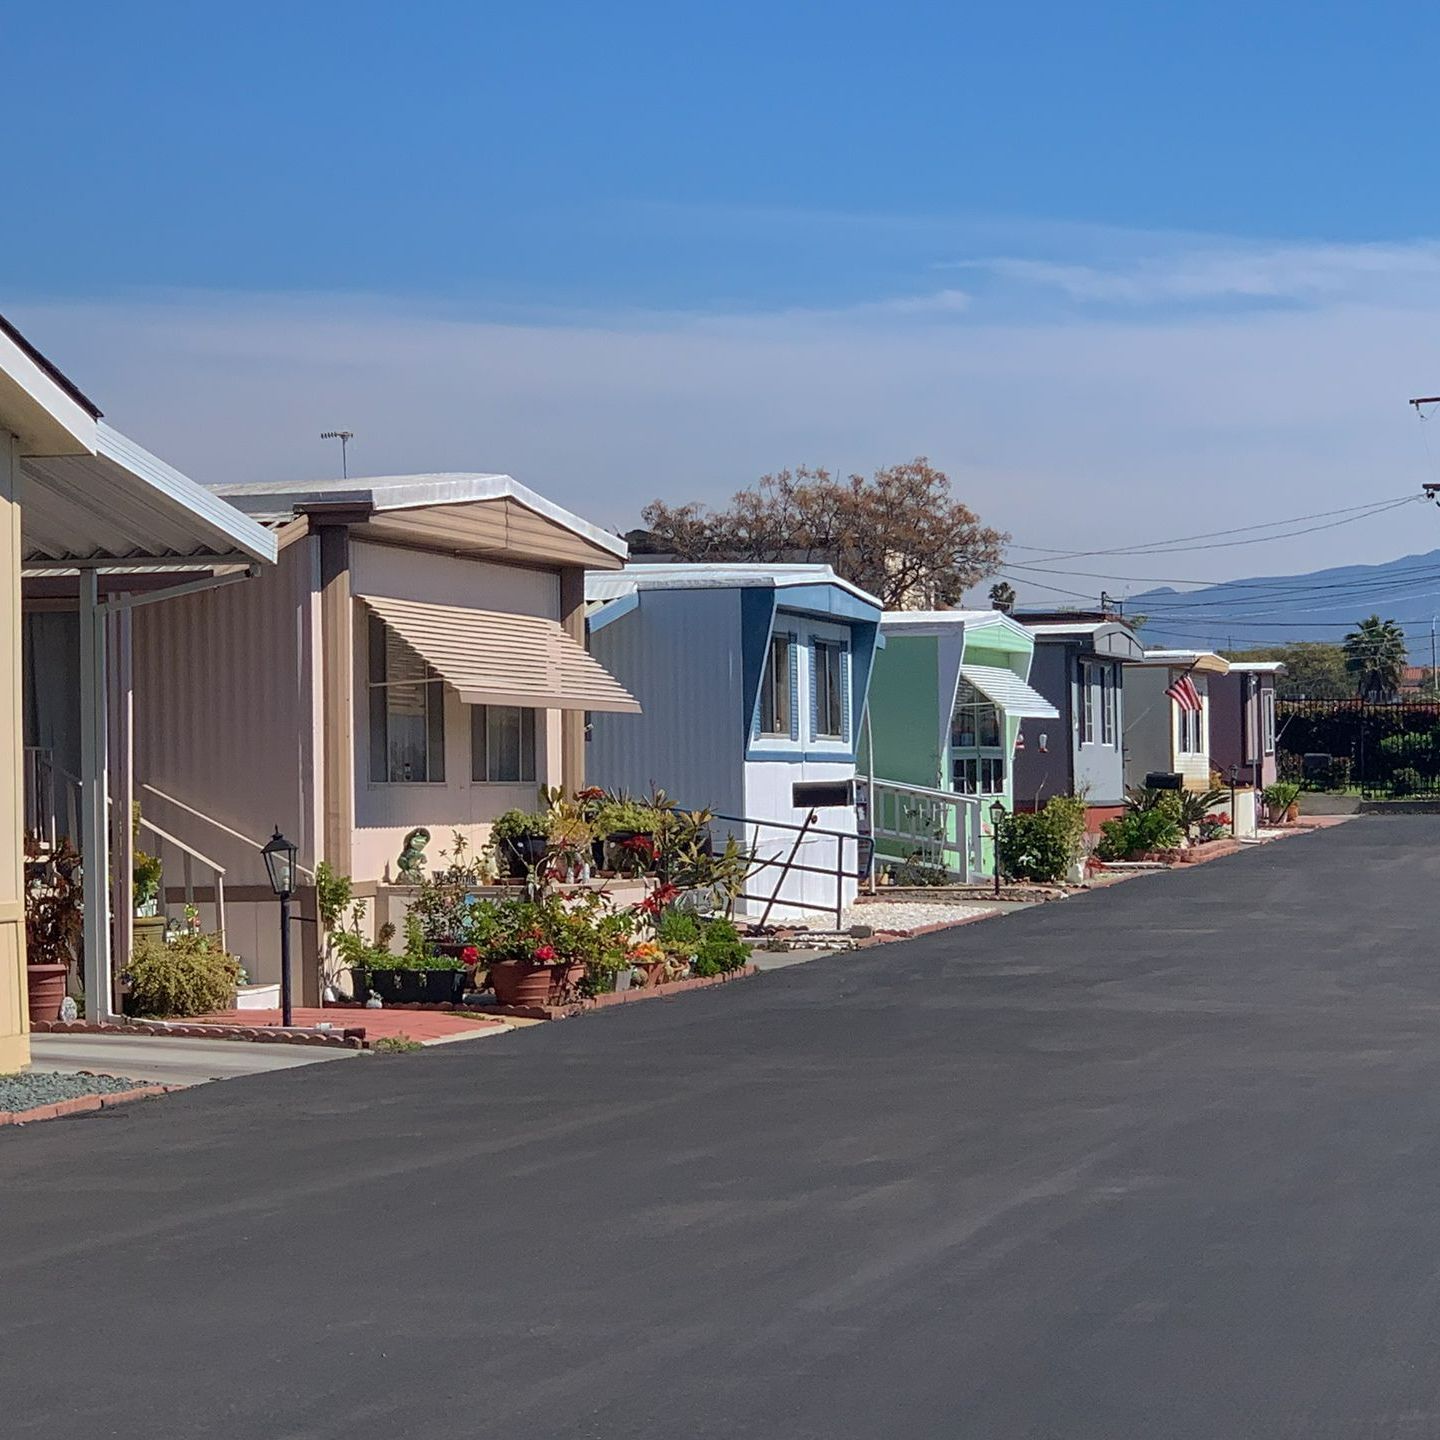 We buy mobile homes too! Contact us today to get a cash offer.